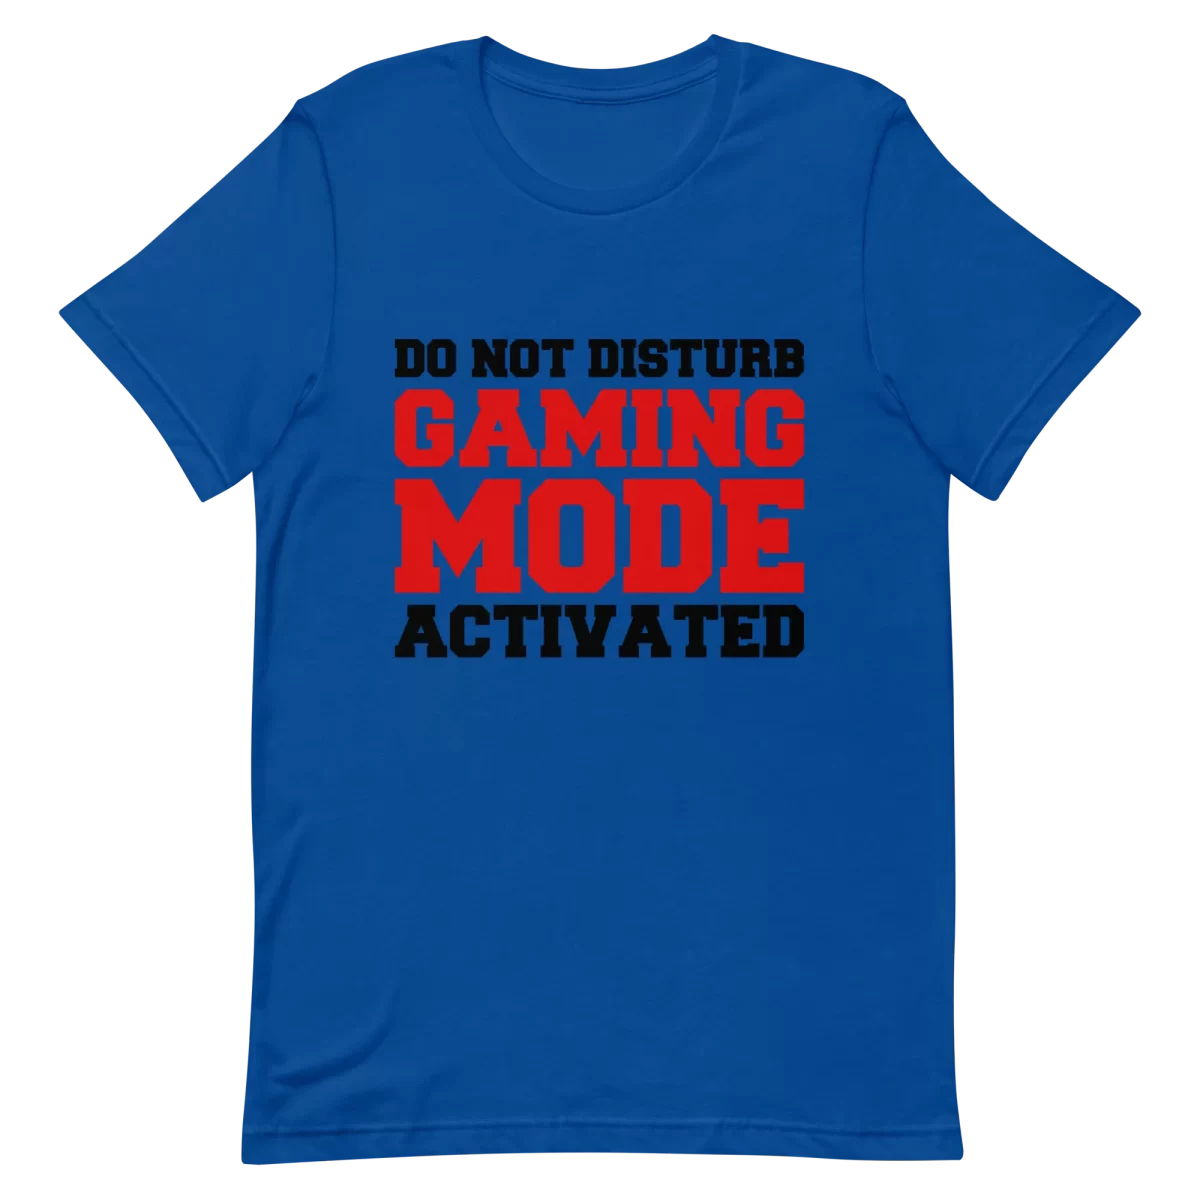 Unisex T-Shirt - Gaming Mode Activated - True Royal